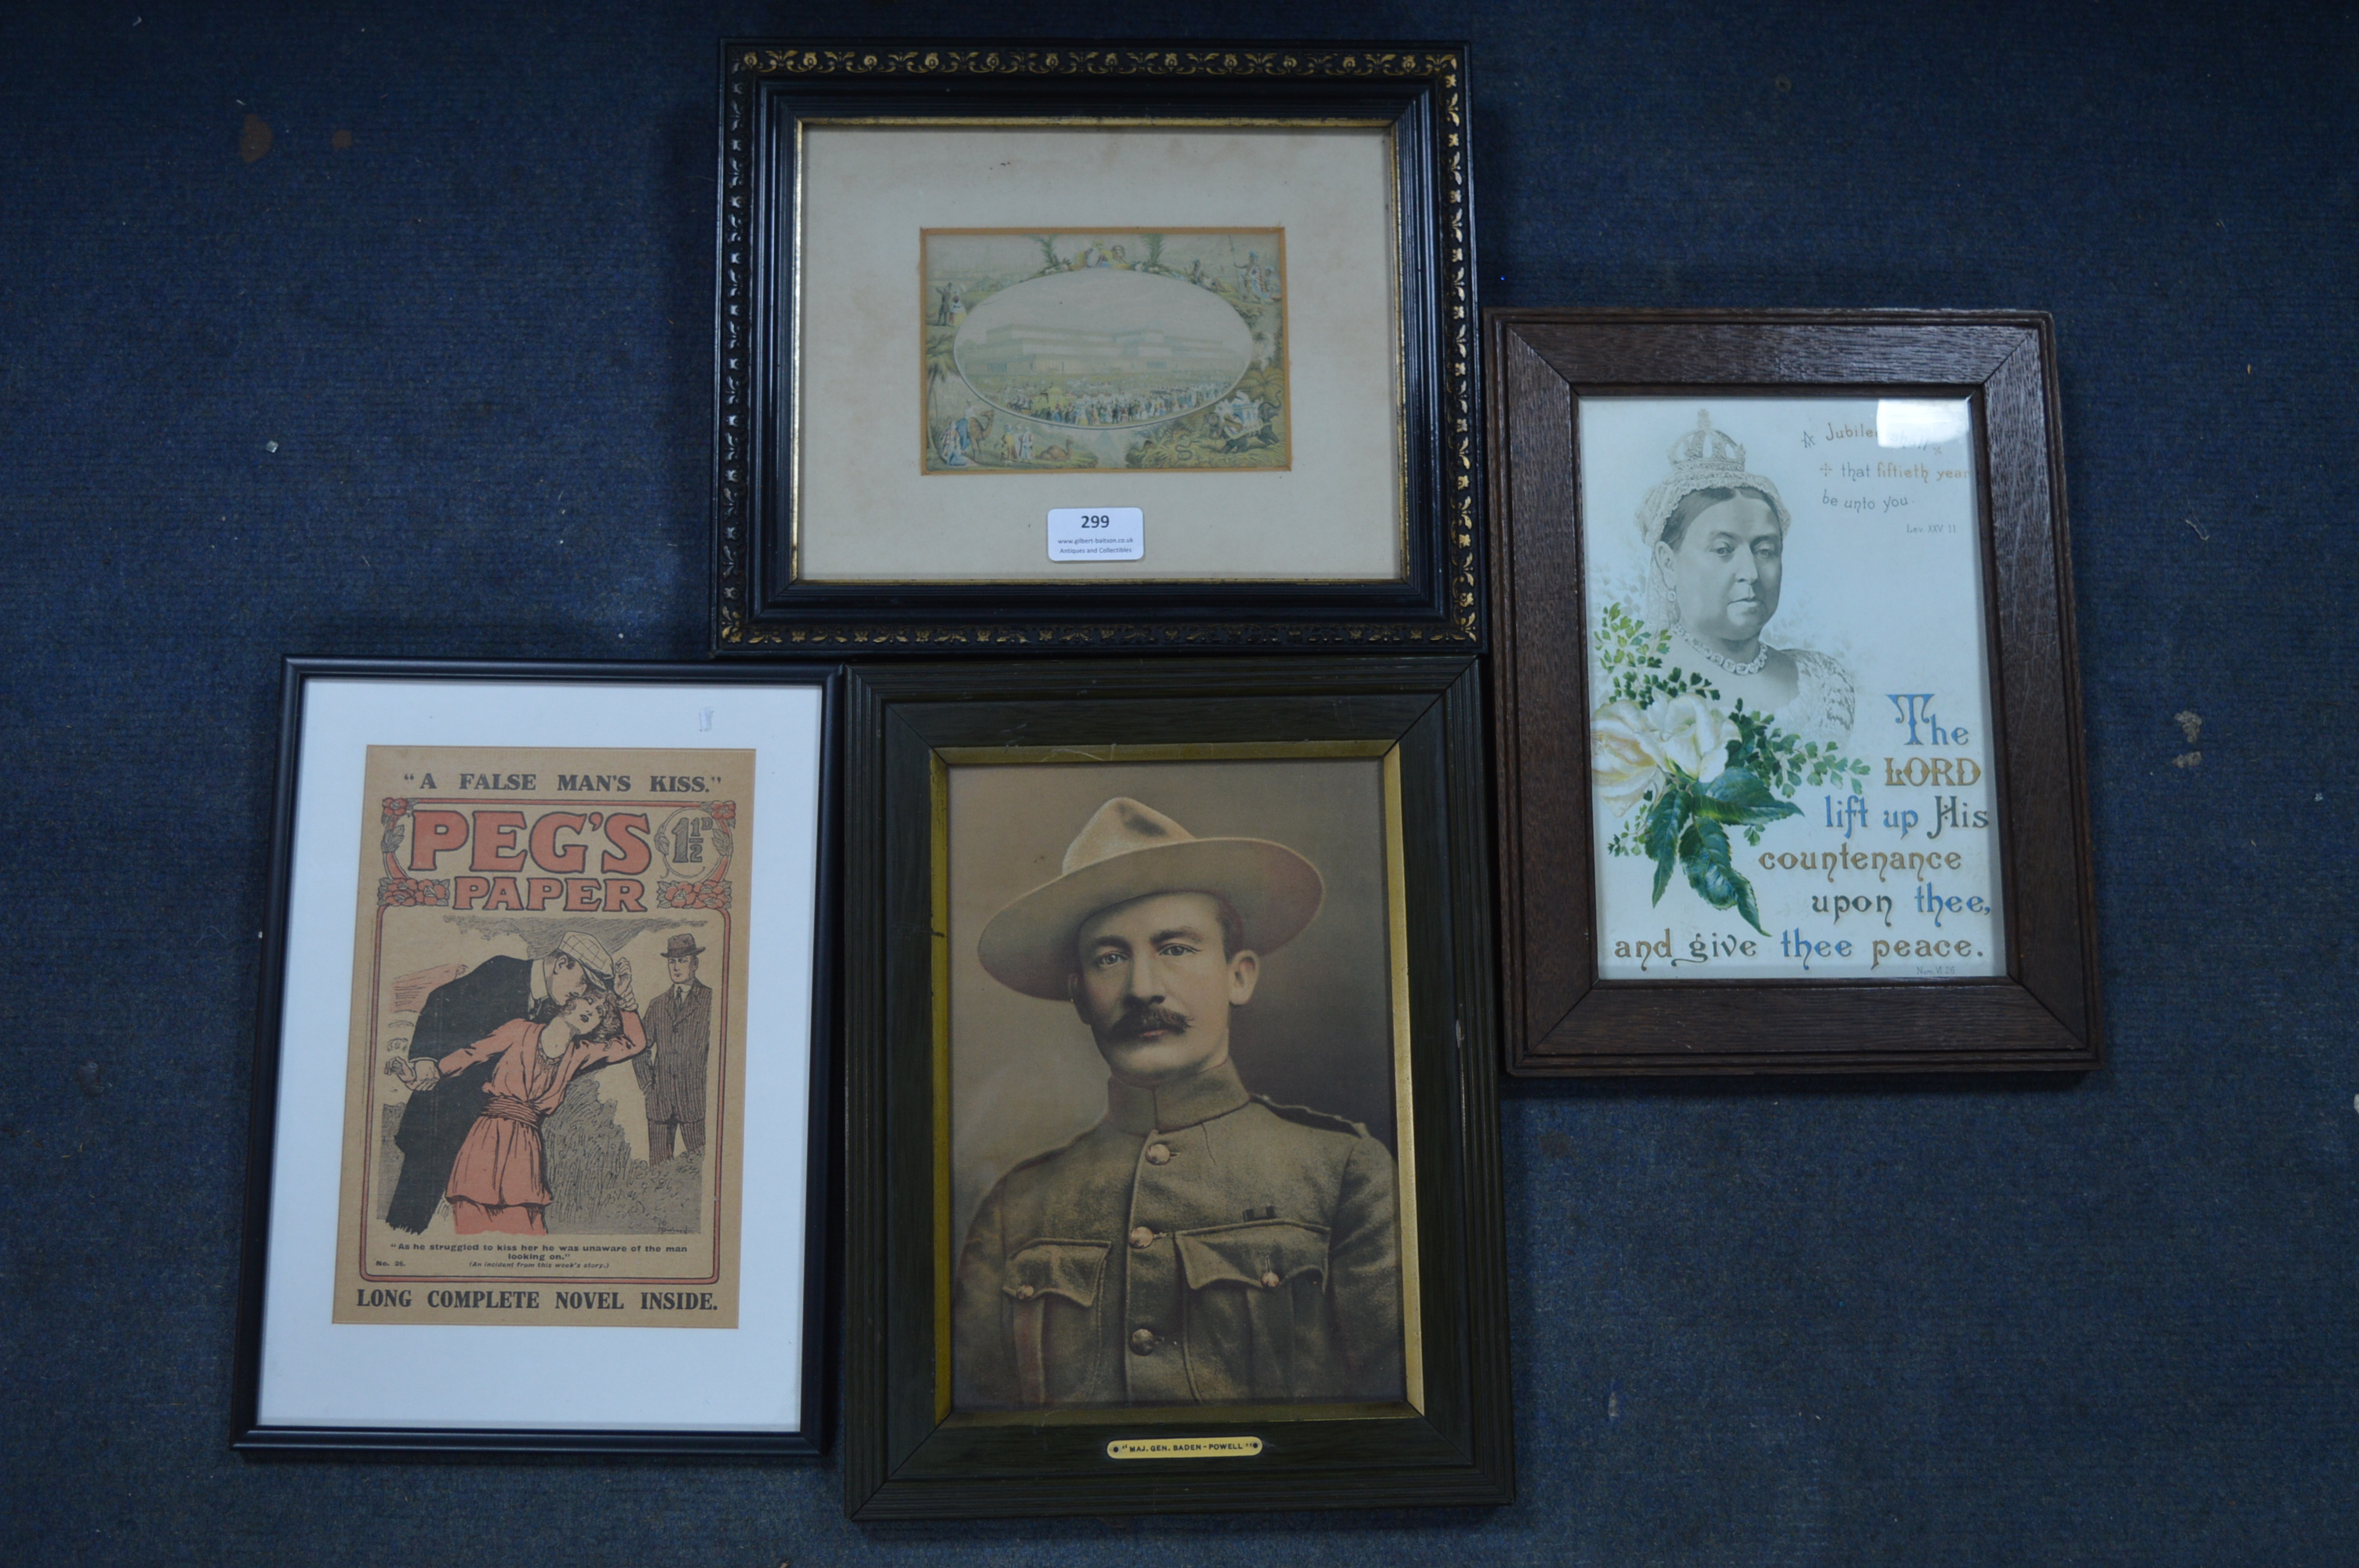 Four Framed Prints - Crystal Palace, Queen Victoria, etc.